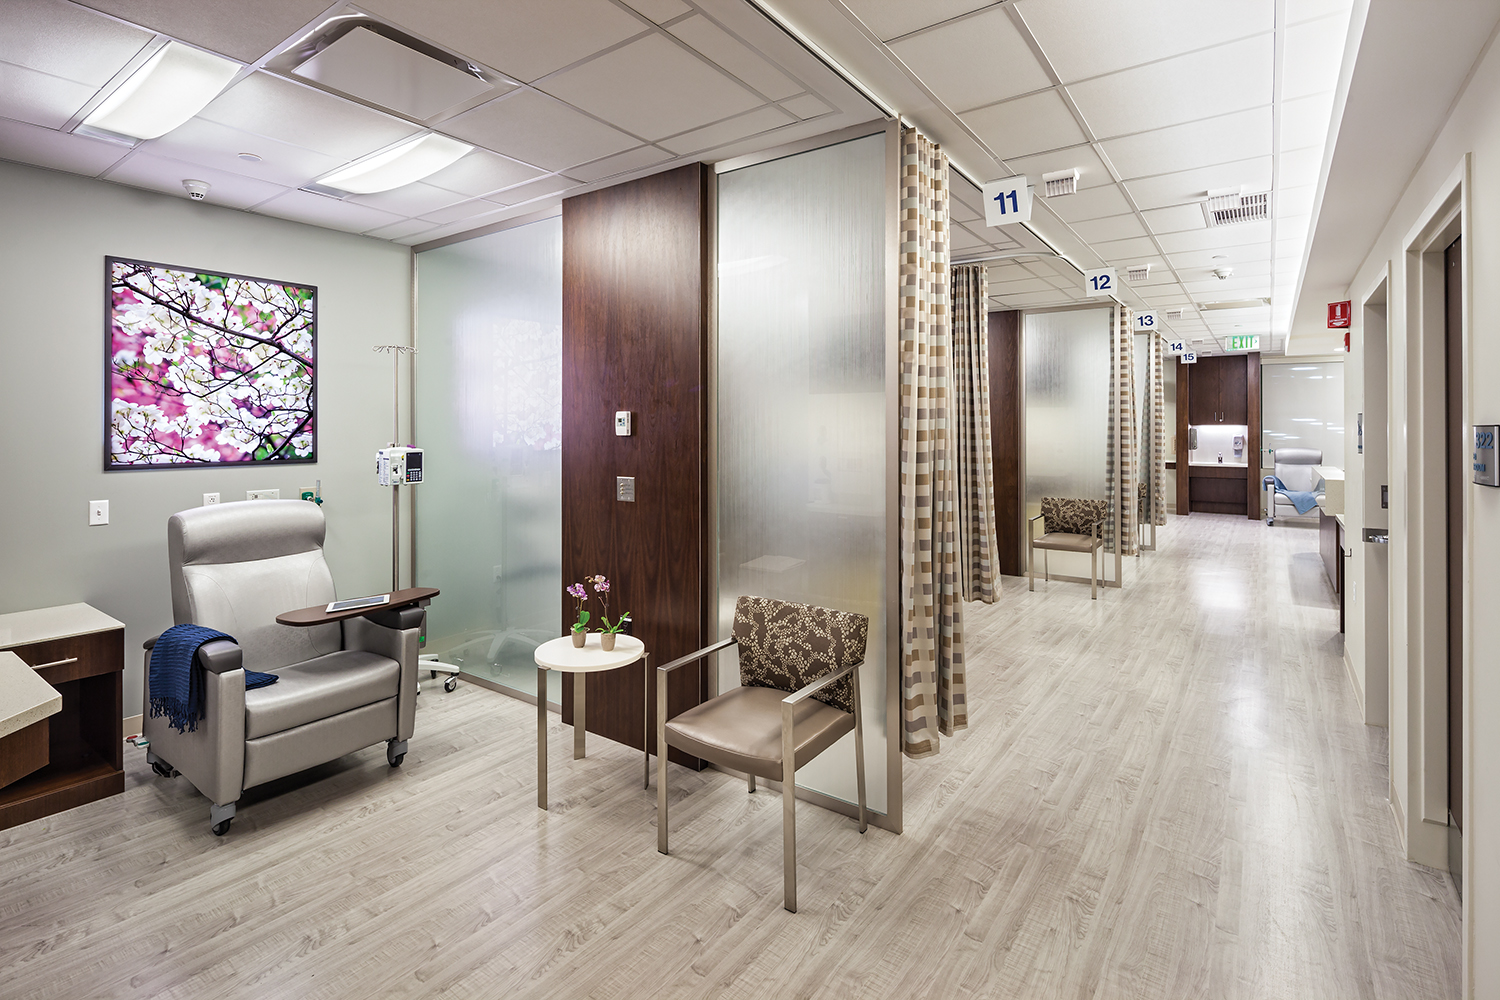 Unity patient room lighting illuminates an infusion station in an open treatment corridor.